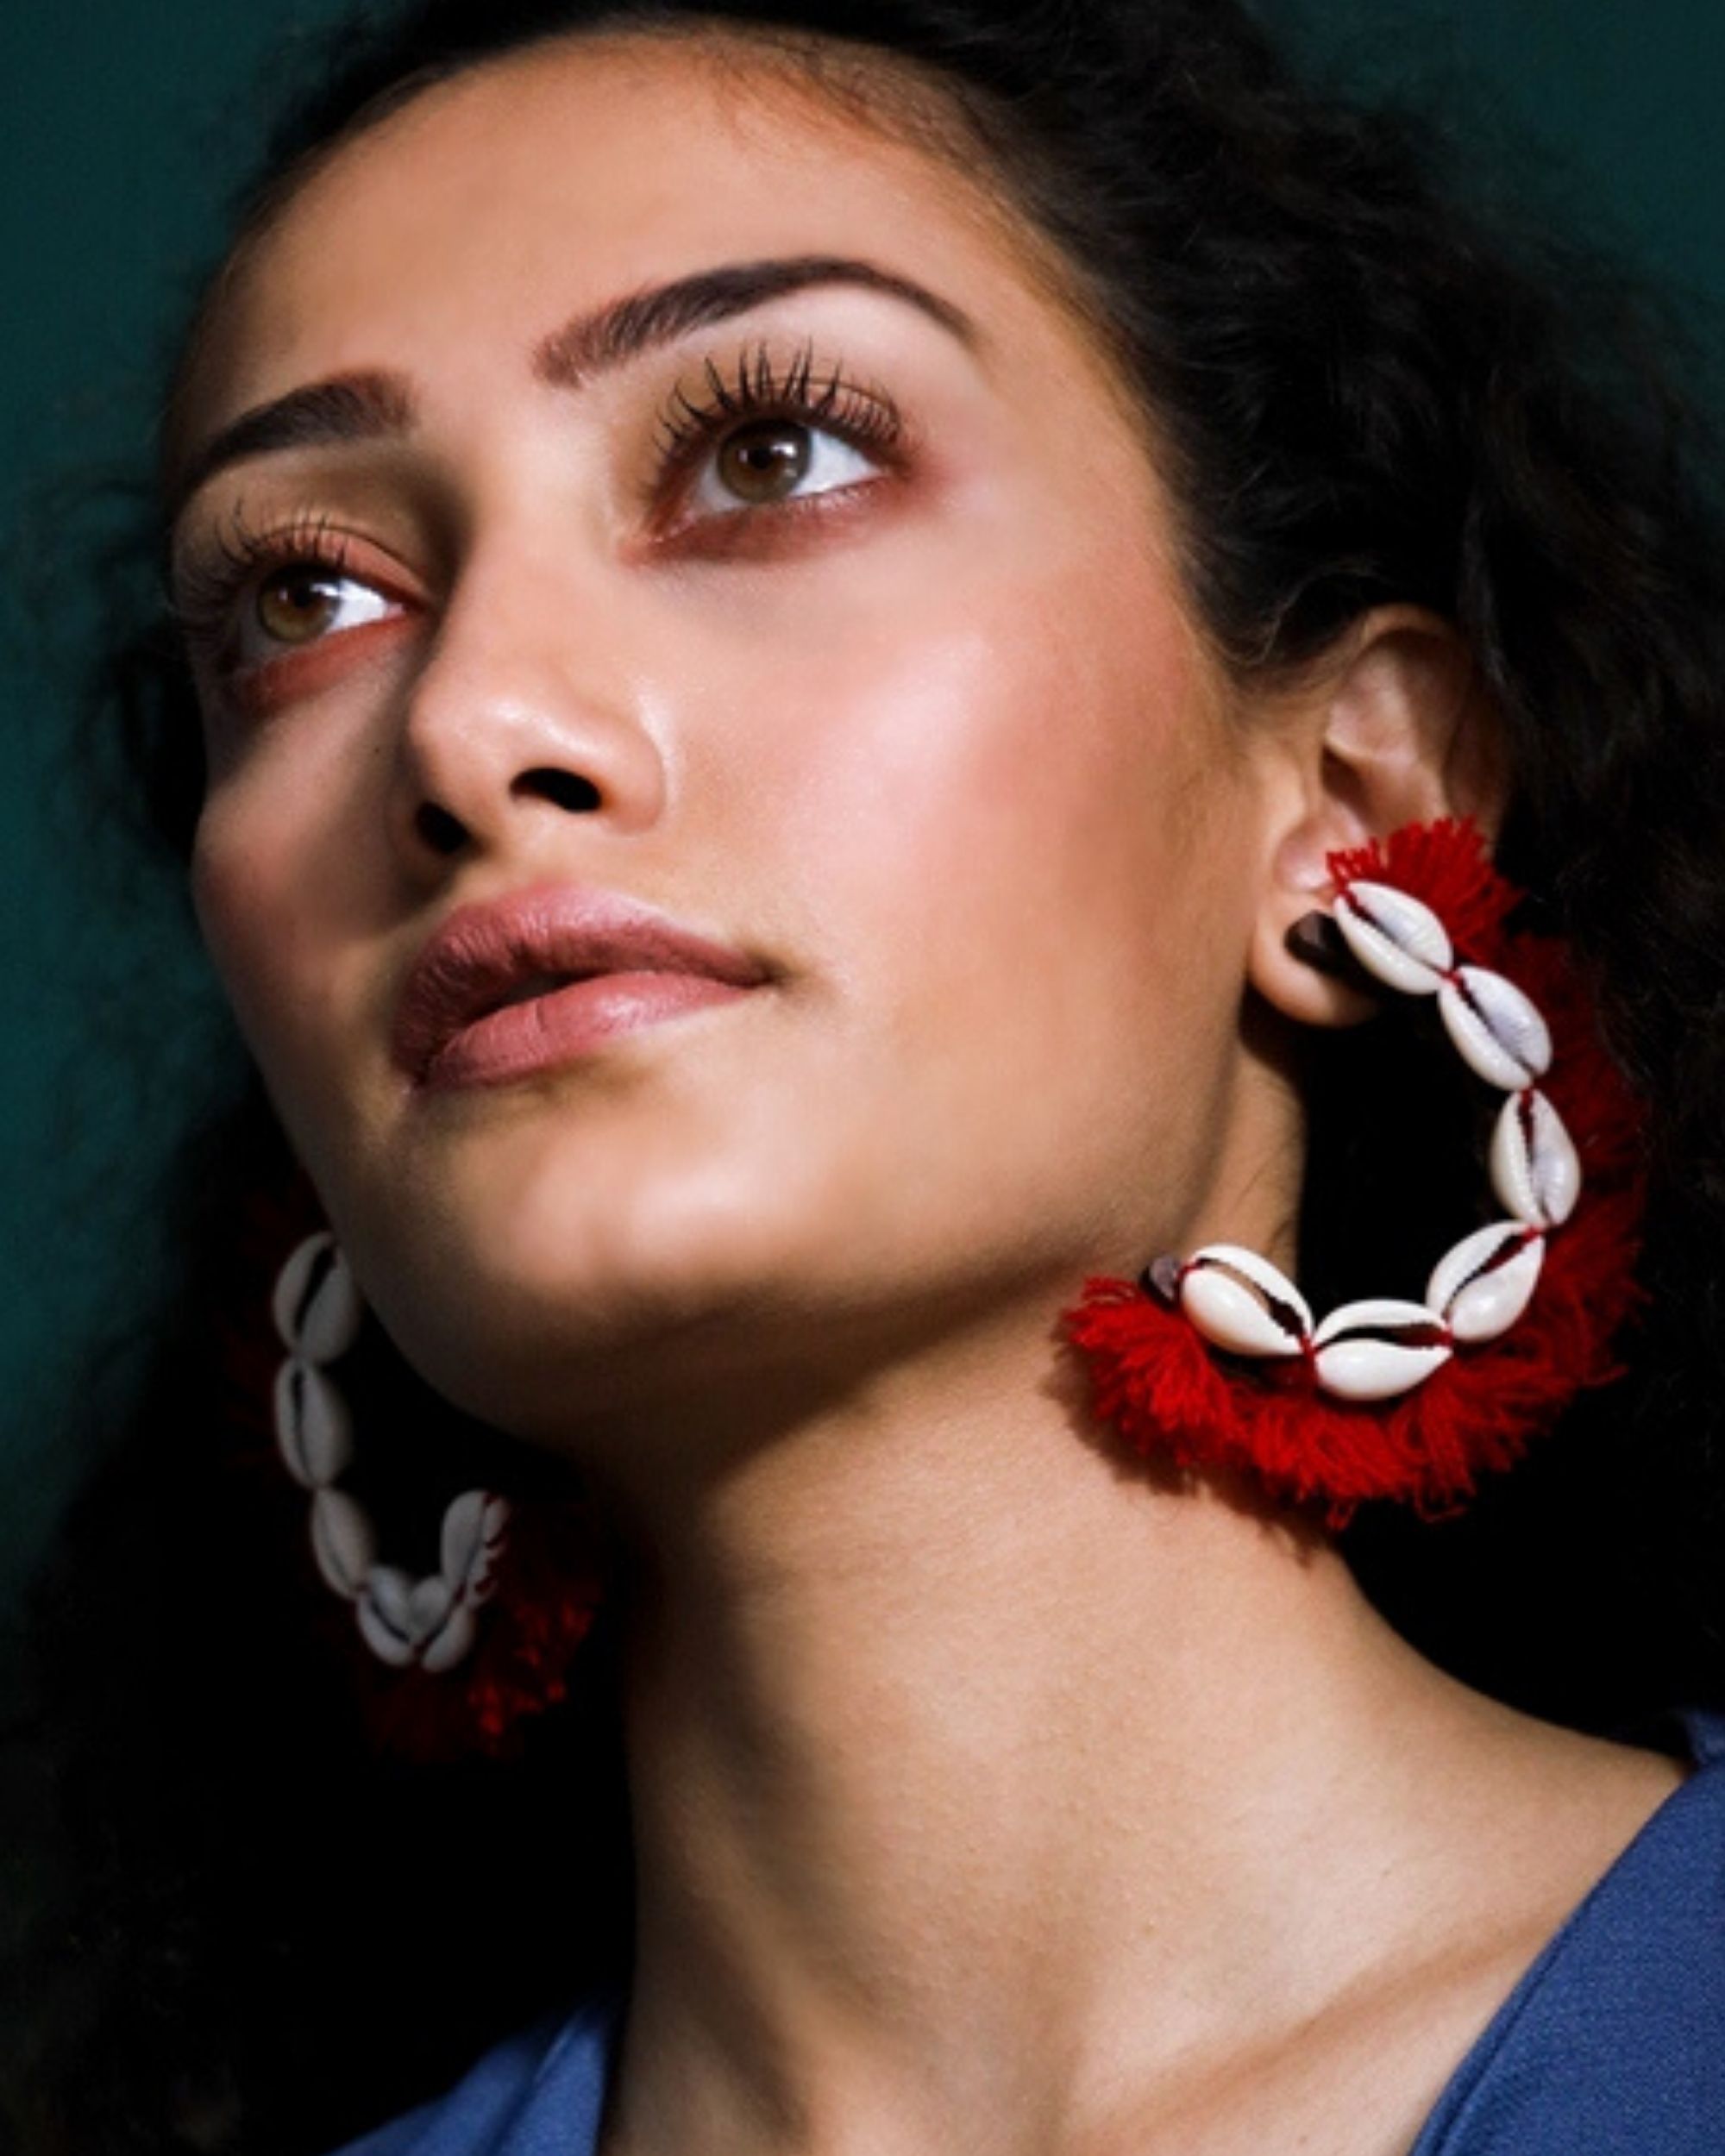 Cowrie shells and red tassels earring